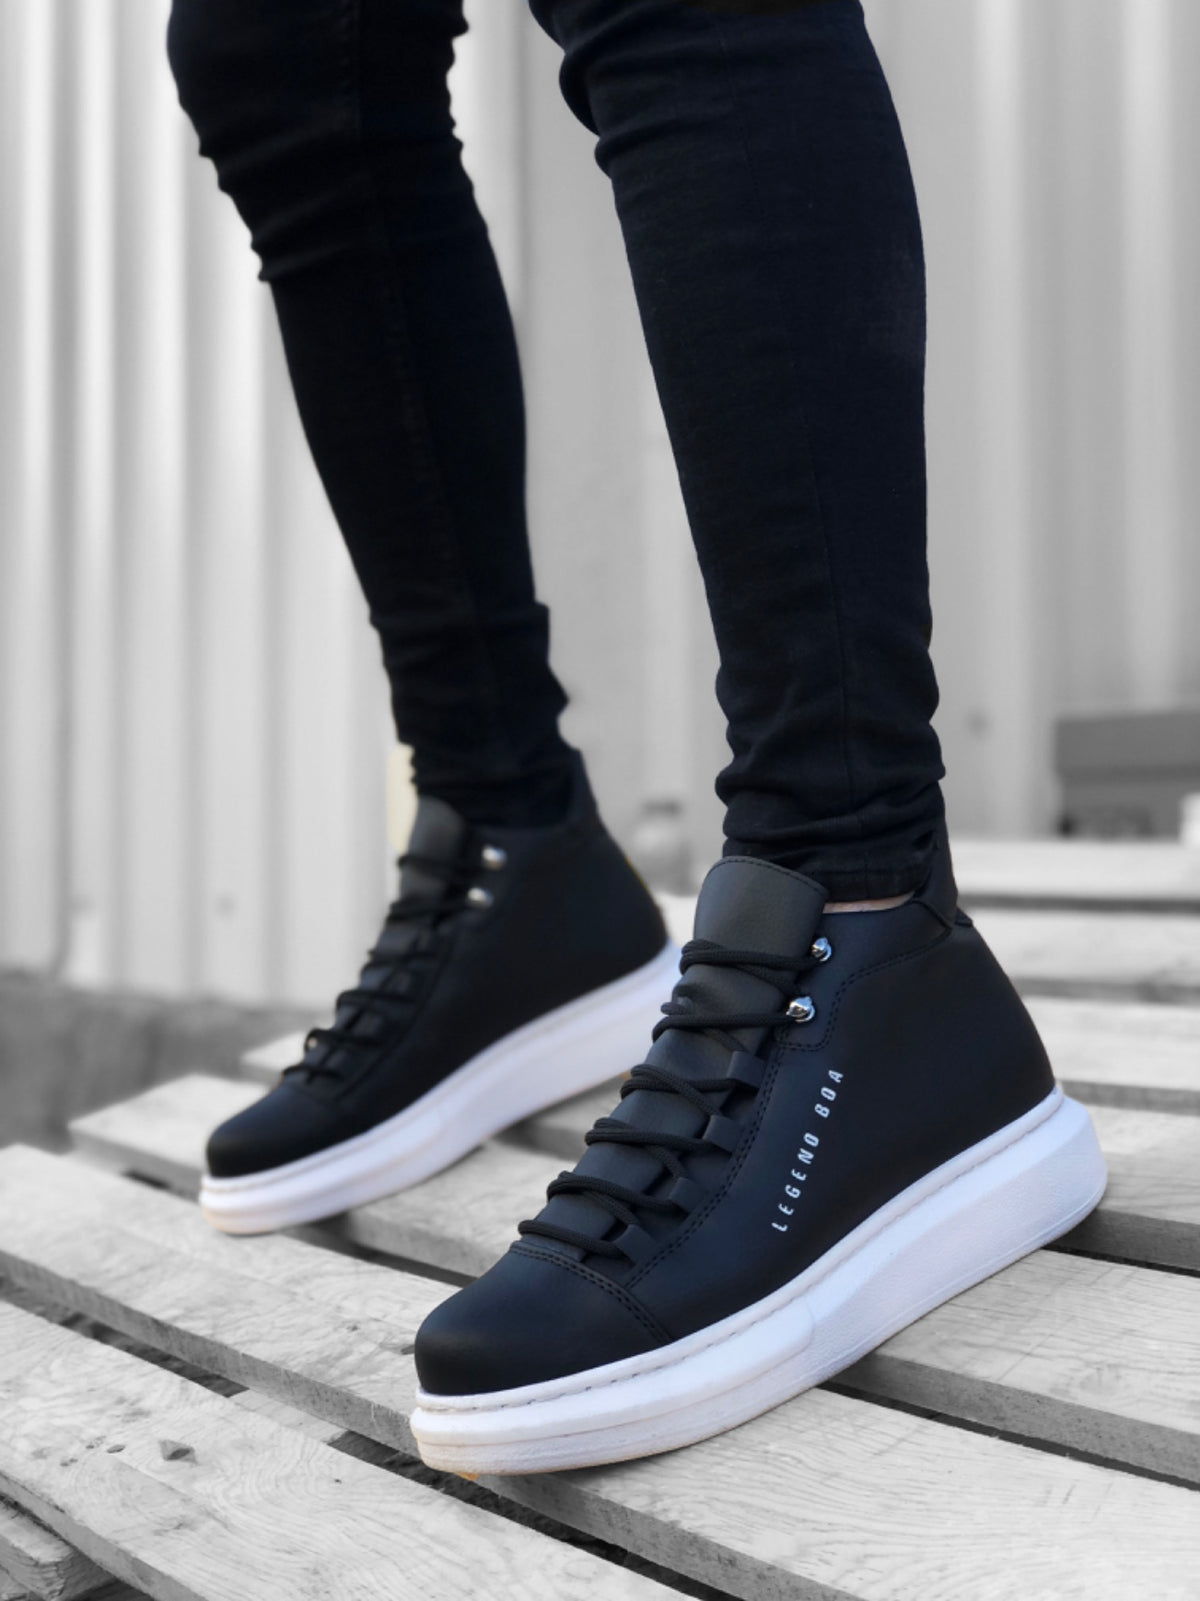 BA0312 Lace-up High Black and White Sole Men's Style Sports Boots - STREETMODE ™